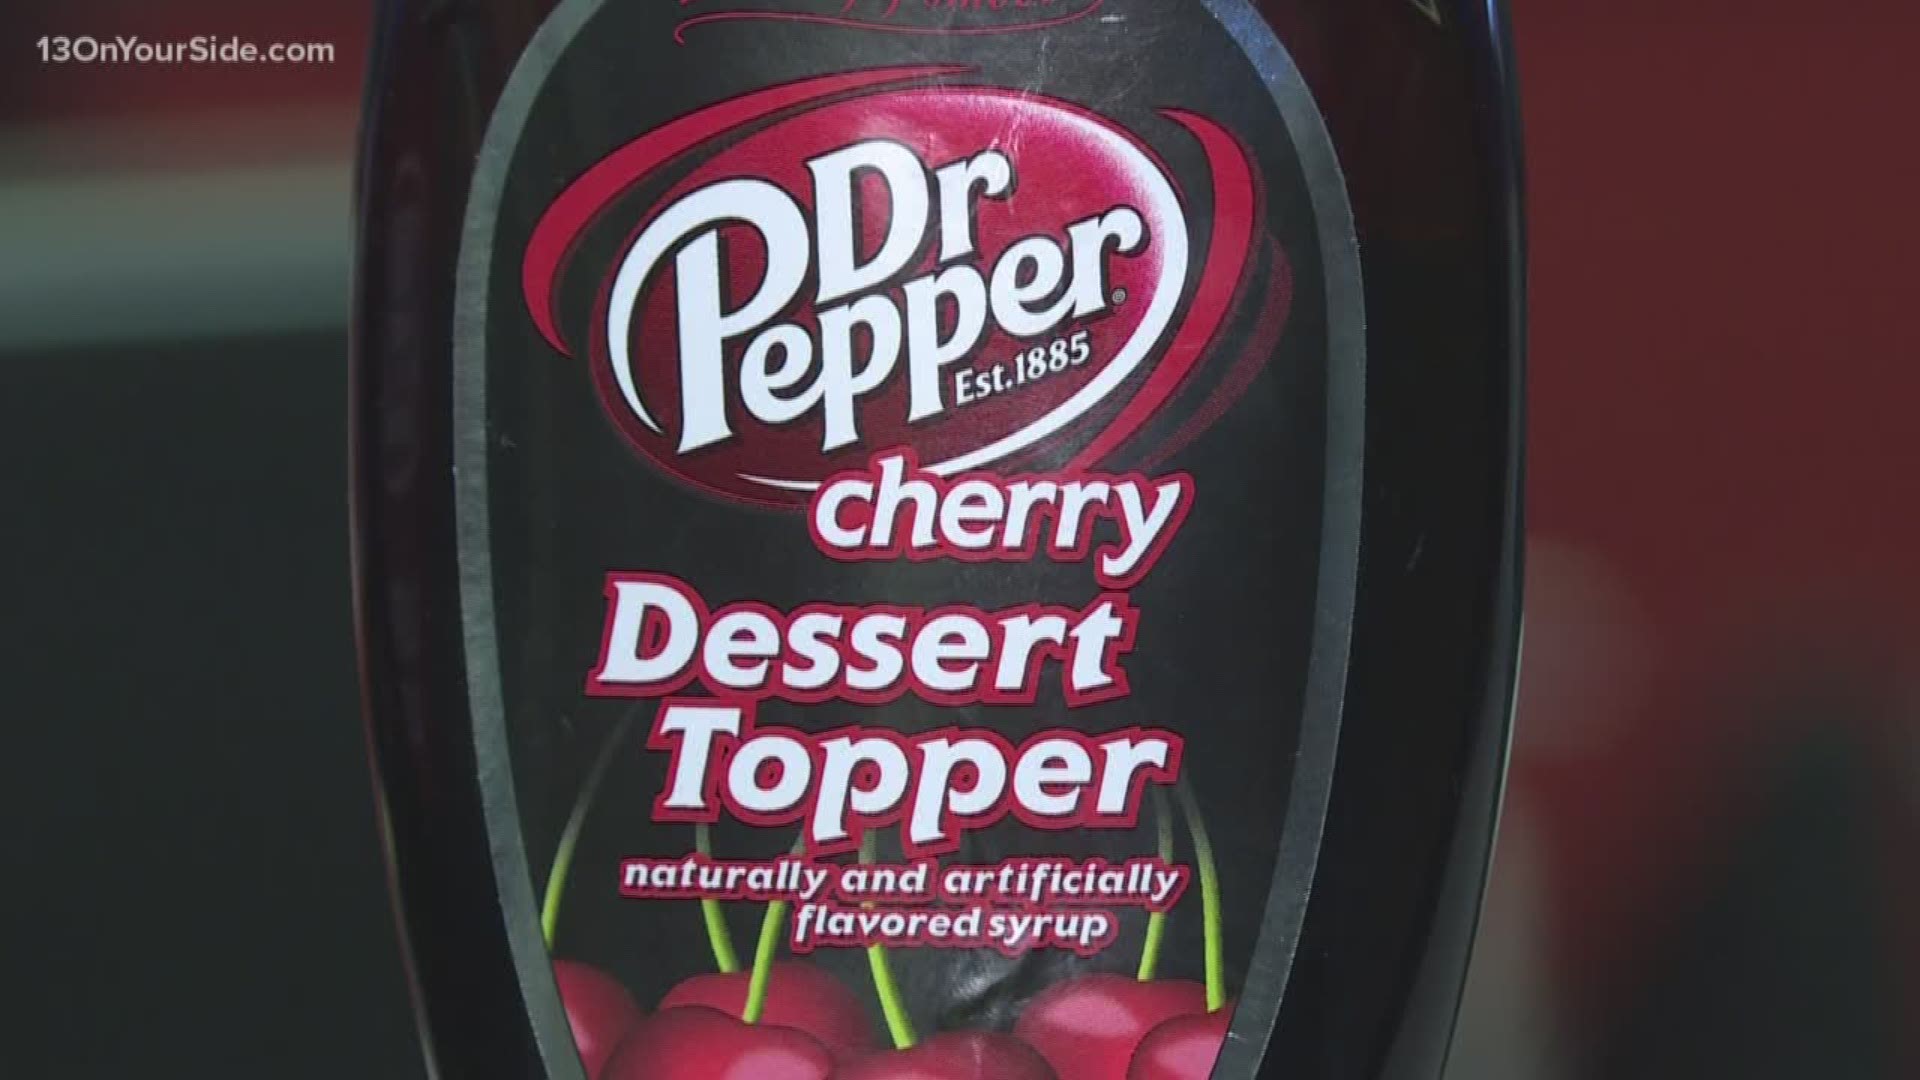 In this edition of "Try It Before You Buy It", Kristin Mazur puts a  limited edition Dr. Pepper Cherry Dessert Topper to the test.